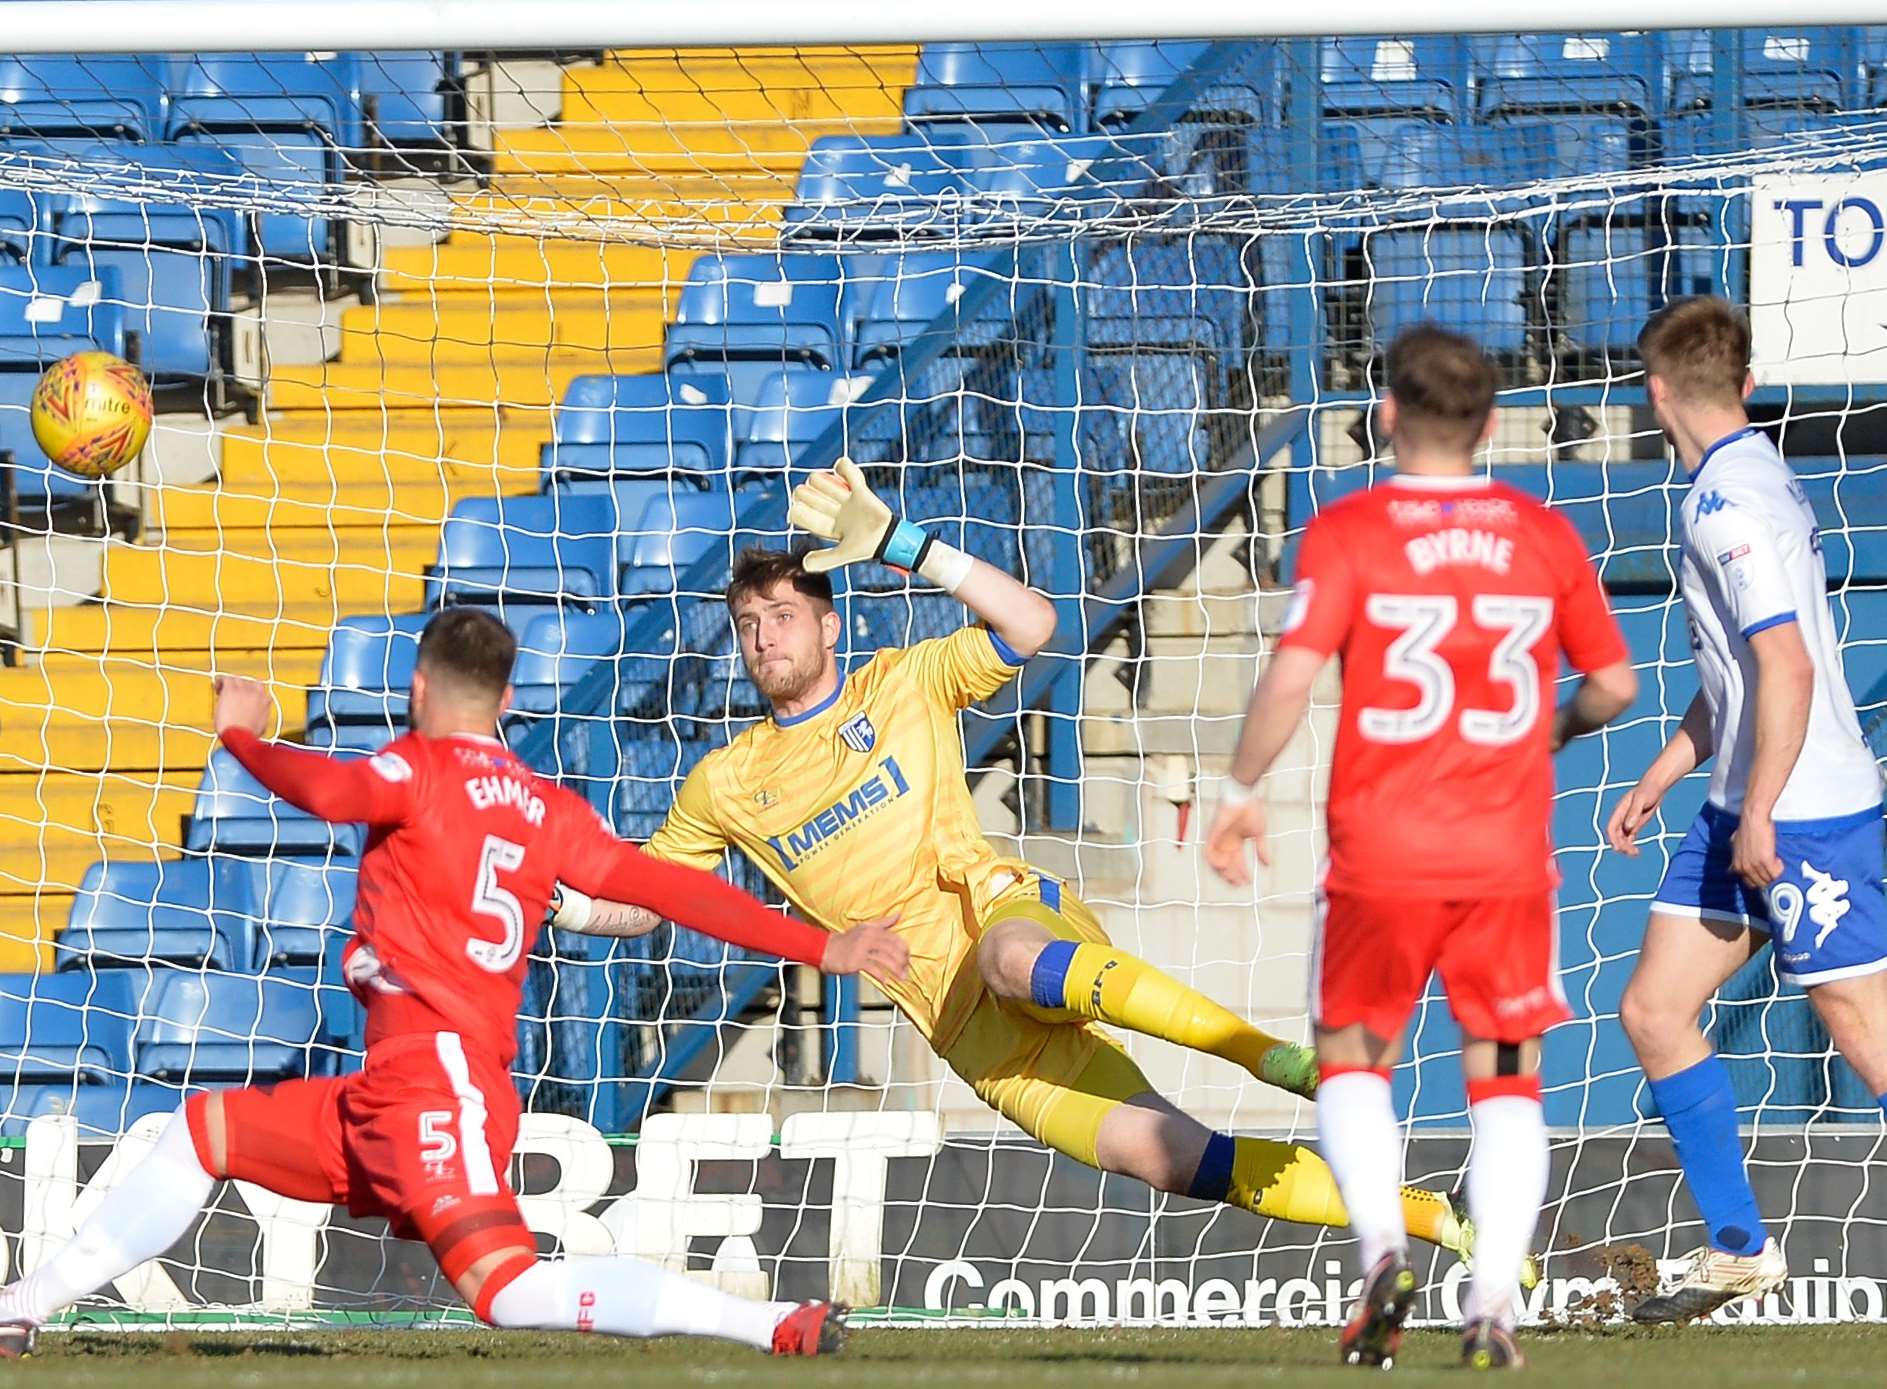 Gills go 2-0 down at Gigg Lane Picture: Ady Kerry